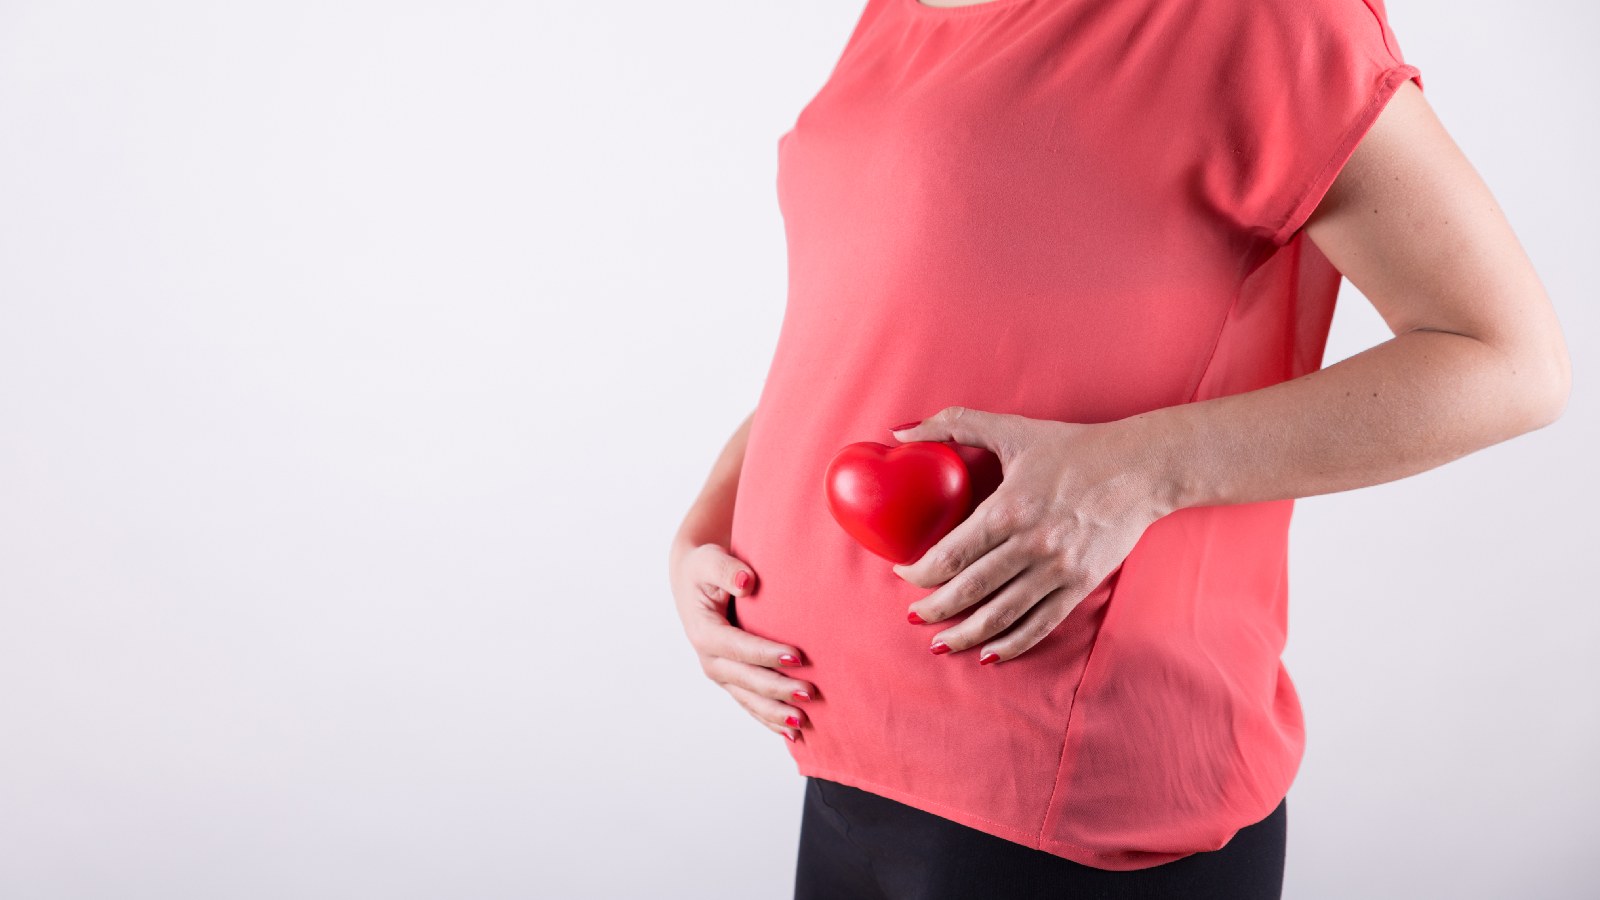 Should you worry about heart palpitations during pregnancy?